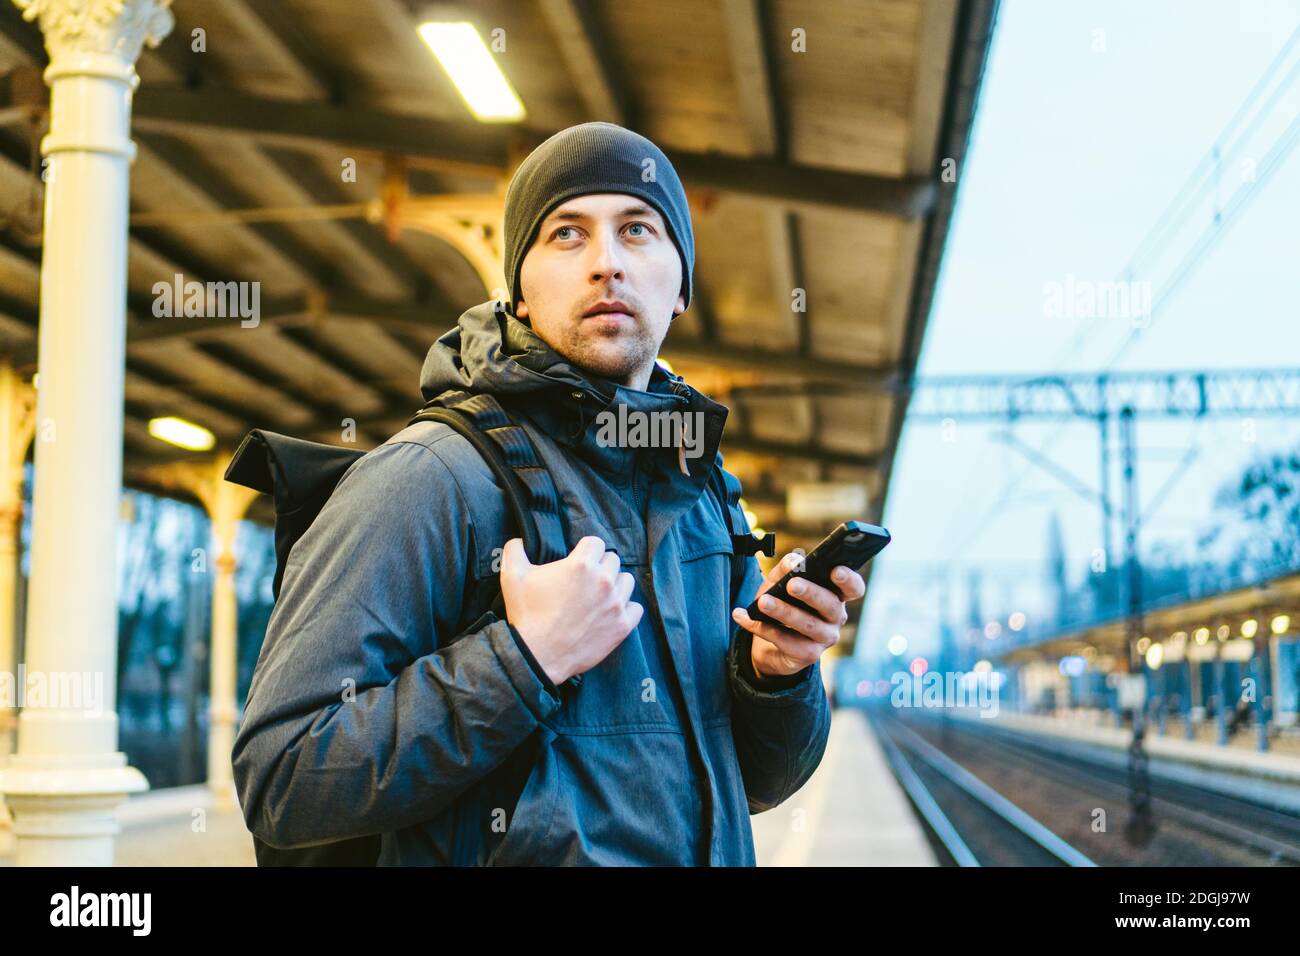 Sopot Railway station. traveler waiting for transportation. Travel concept. Man at the train station. Portrait Caucasian Male In Stock Photo